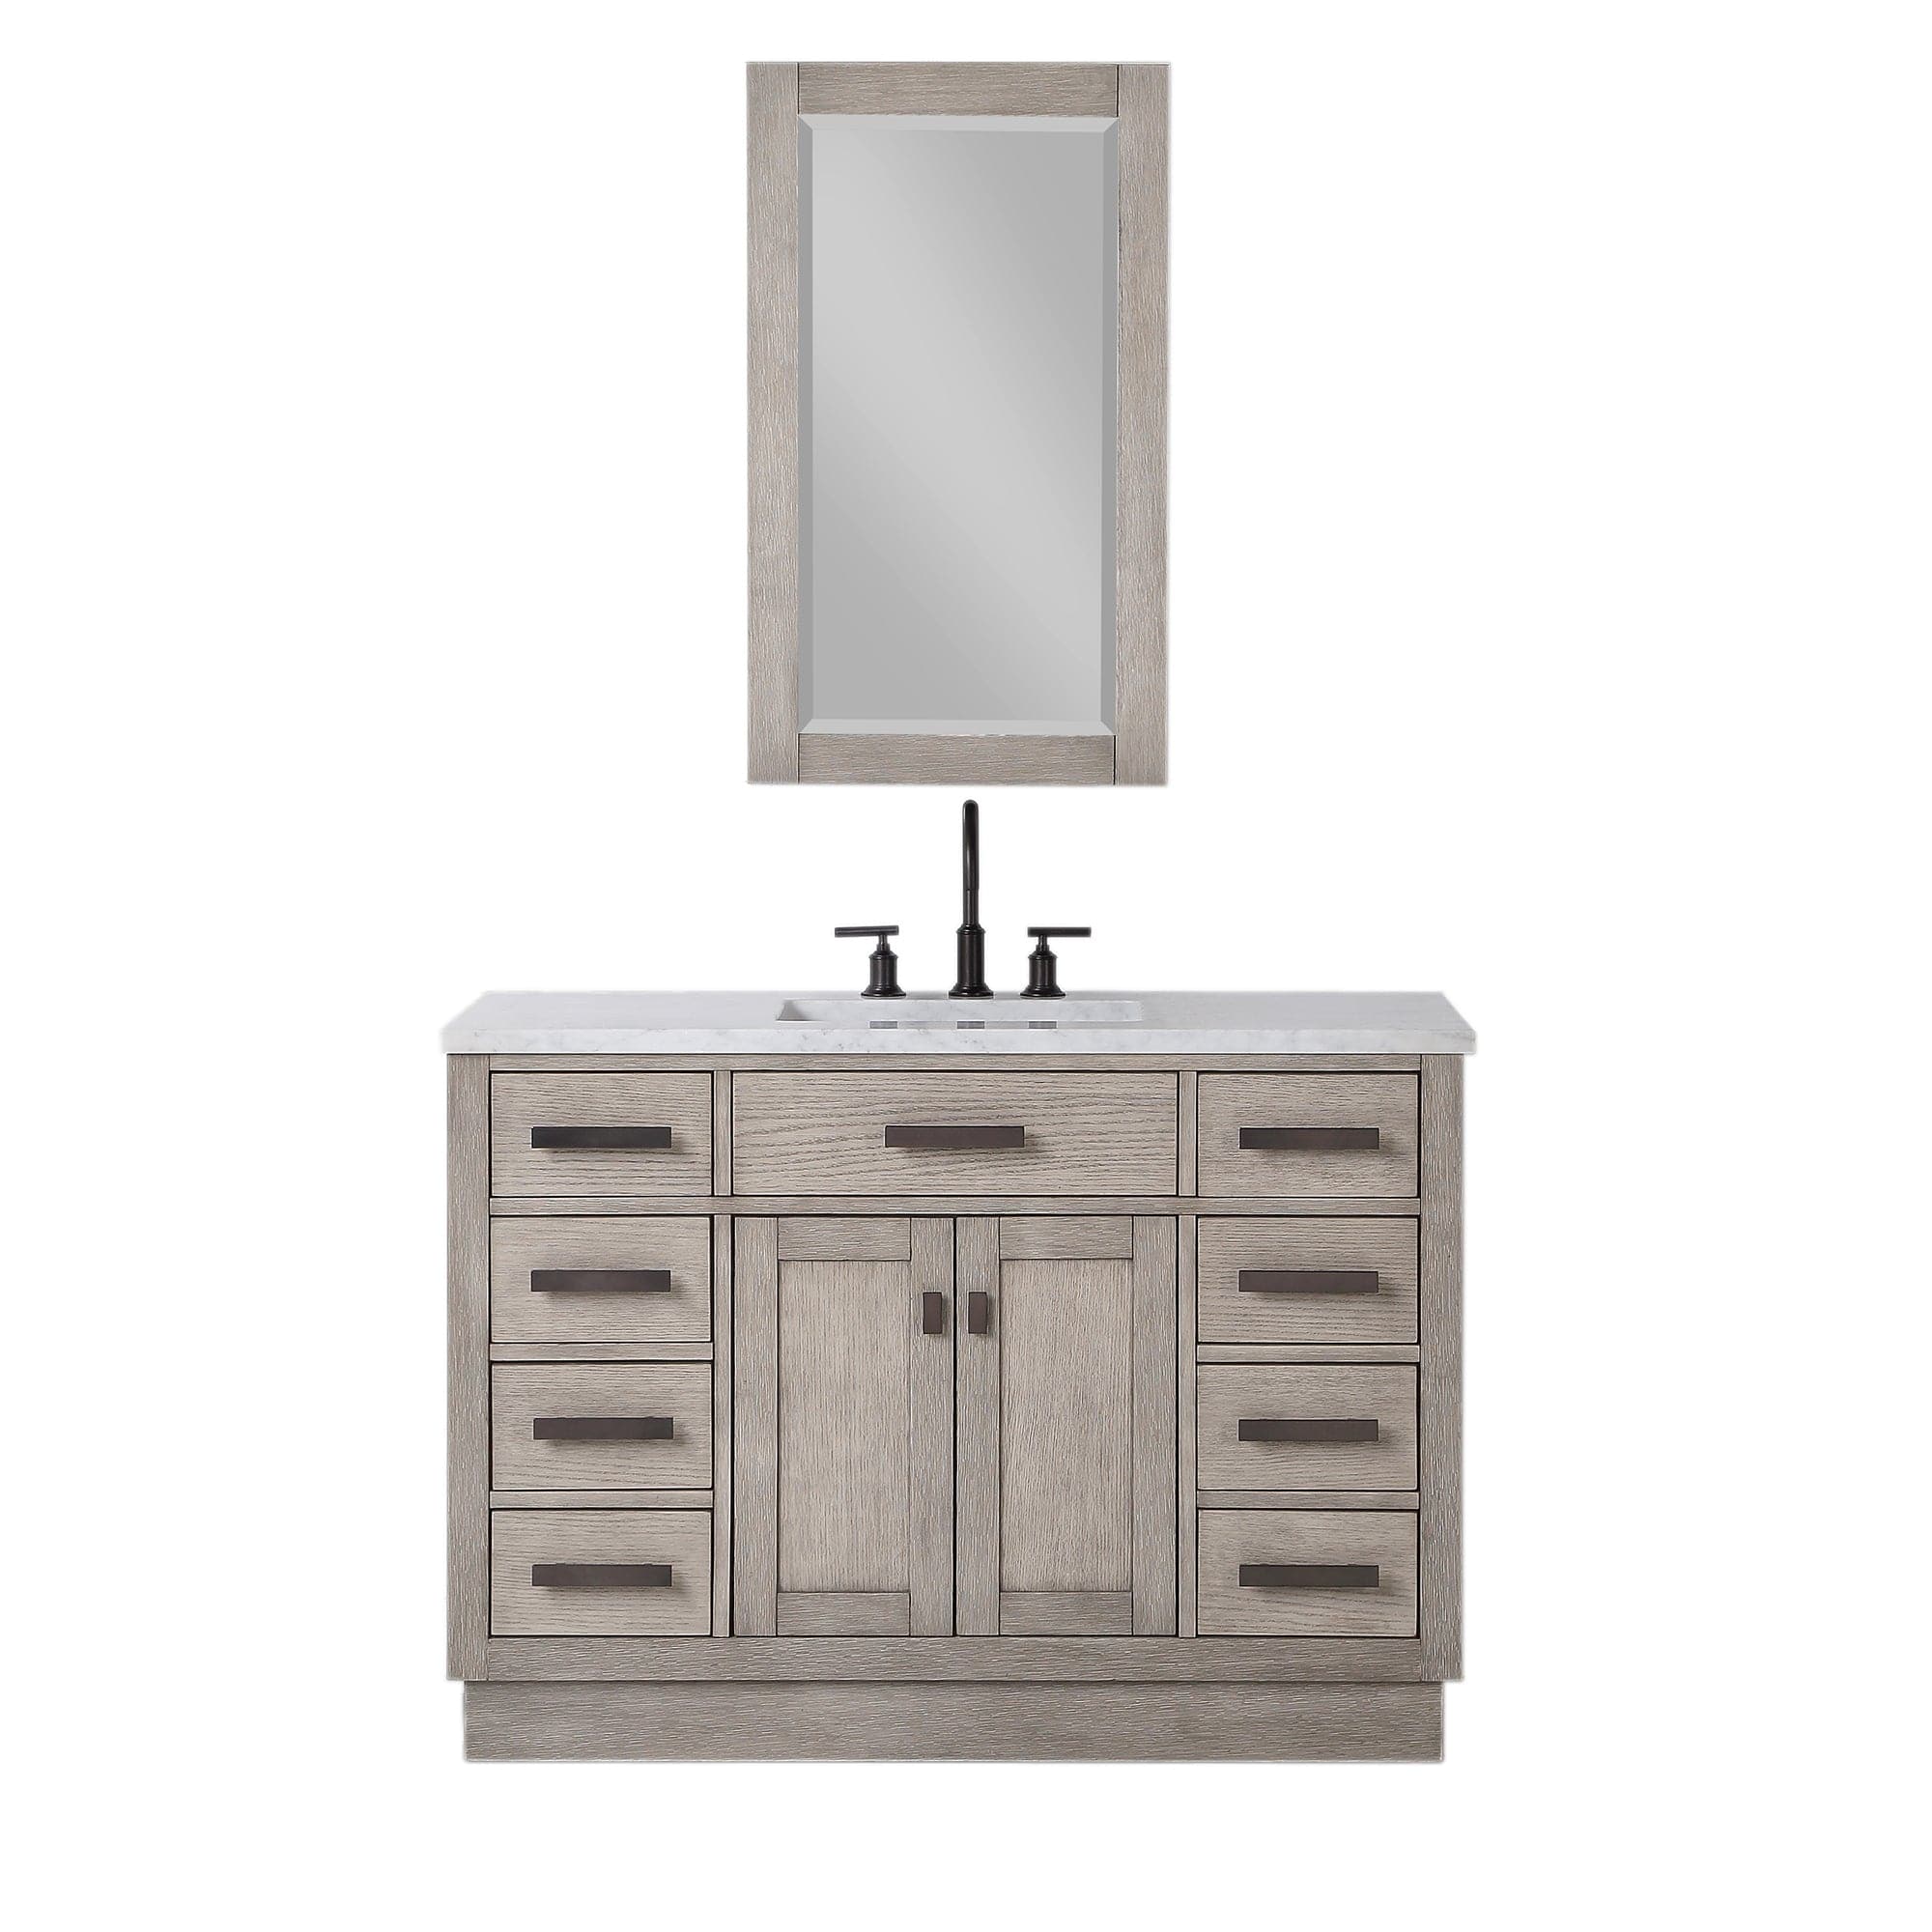 Chestnut 48 In. Single Sink Carrara White Marble Countertop Vanity In Grey Oak with Mirror - Molaix732030764712CH48CW03GK-R21000000